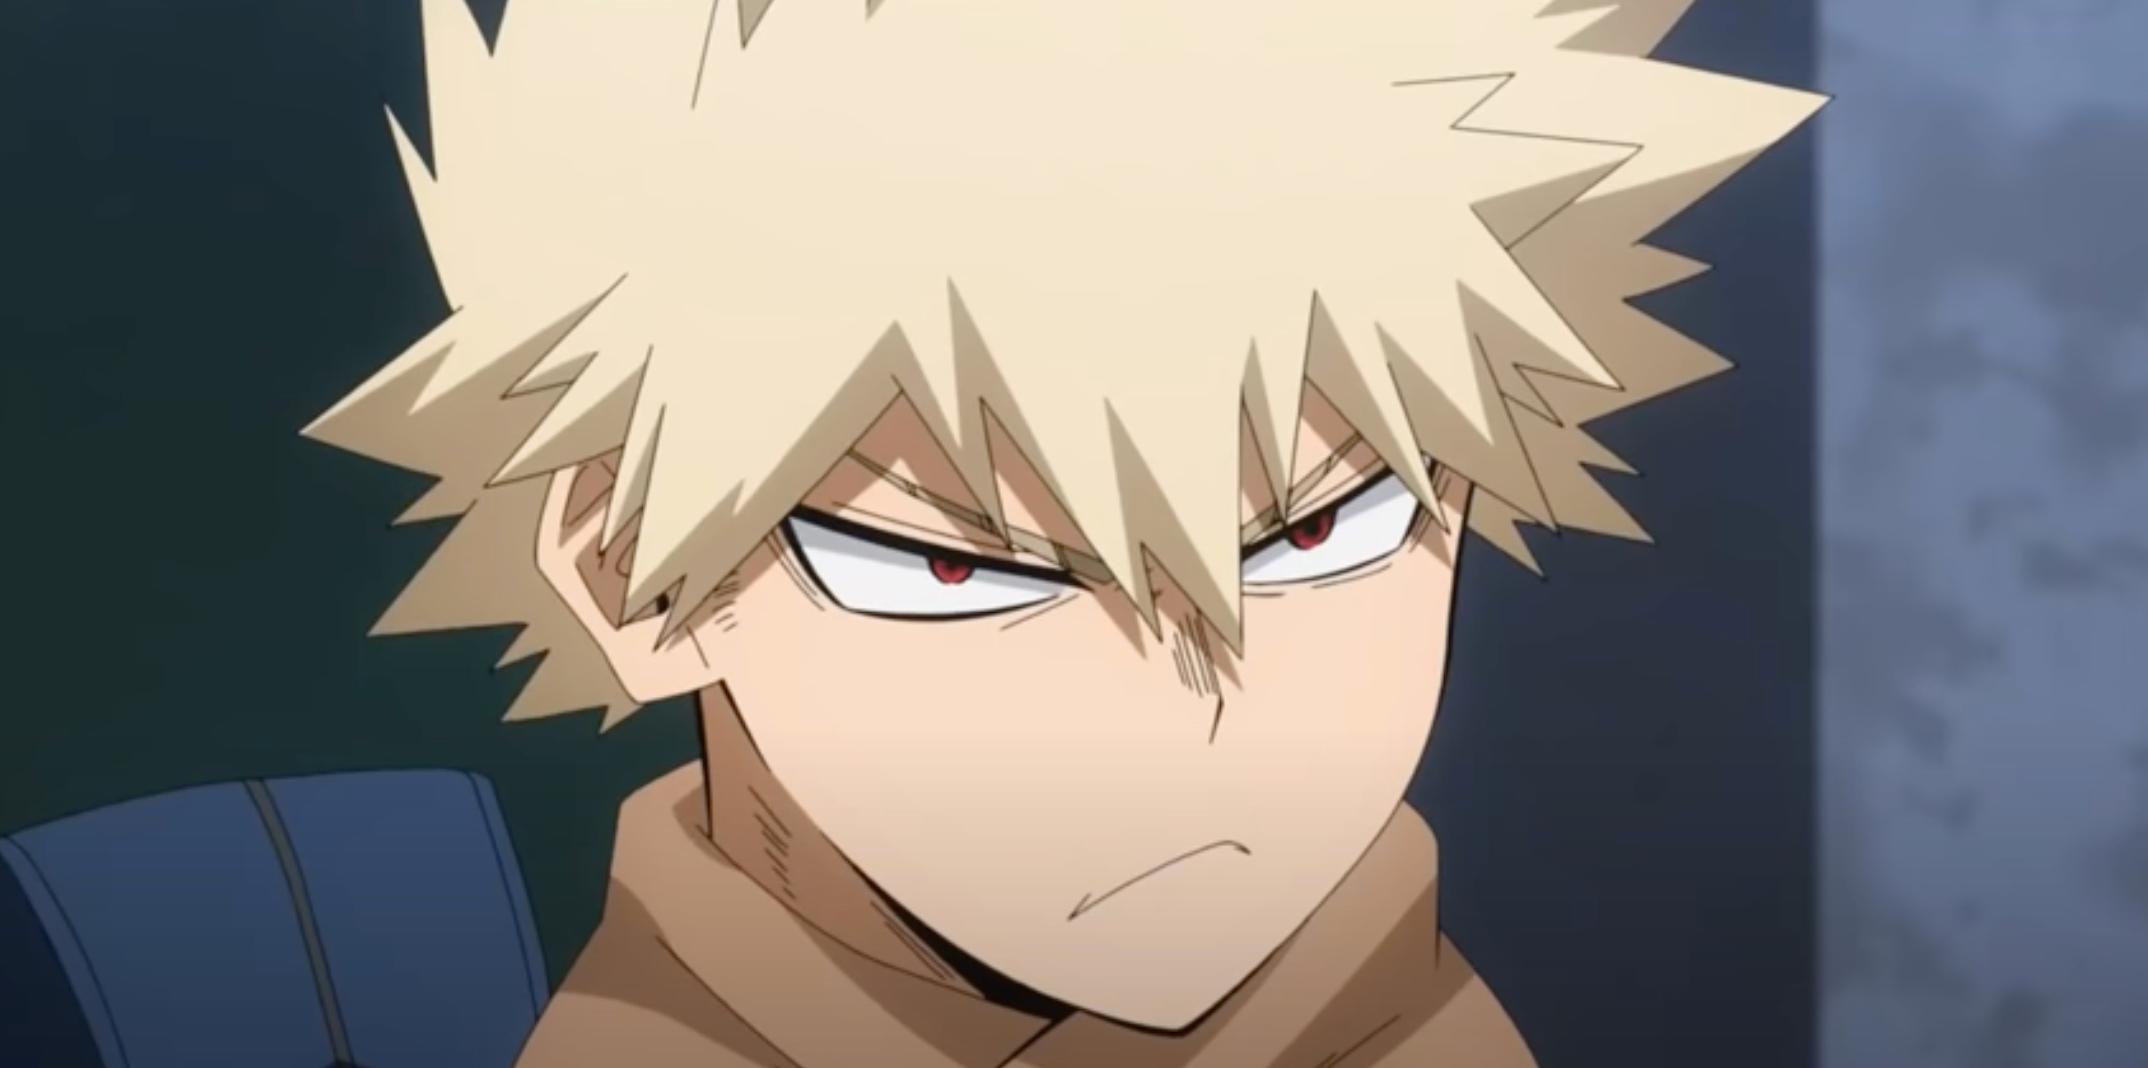 Will Bakugo Become a Hero or a Villain? - This Week in Anime - Anime News  Network